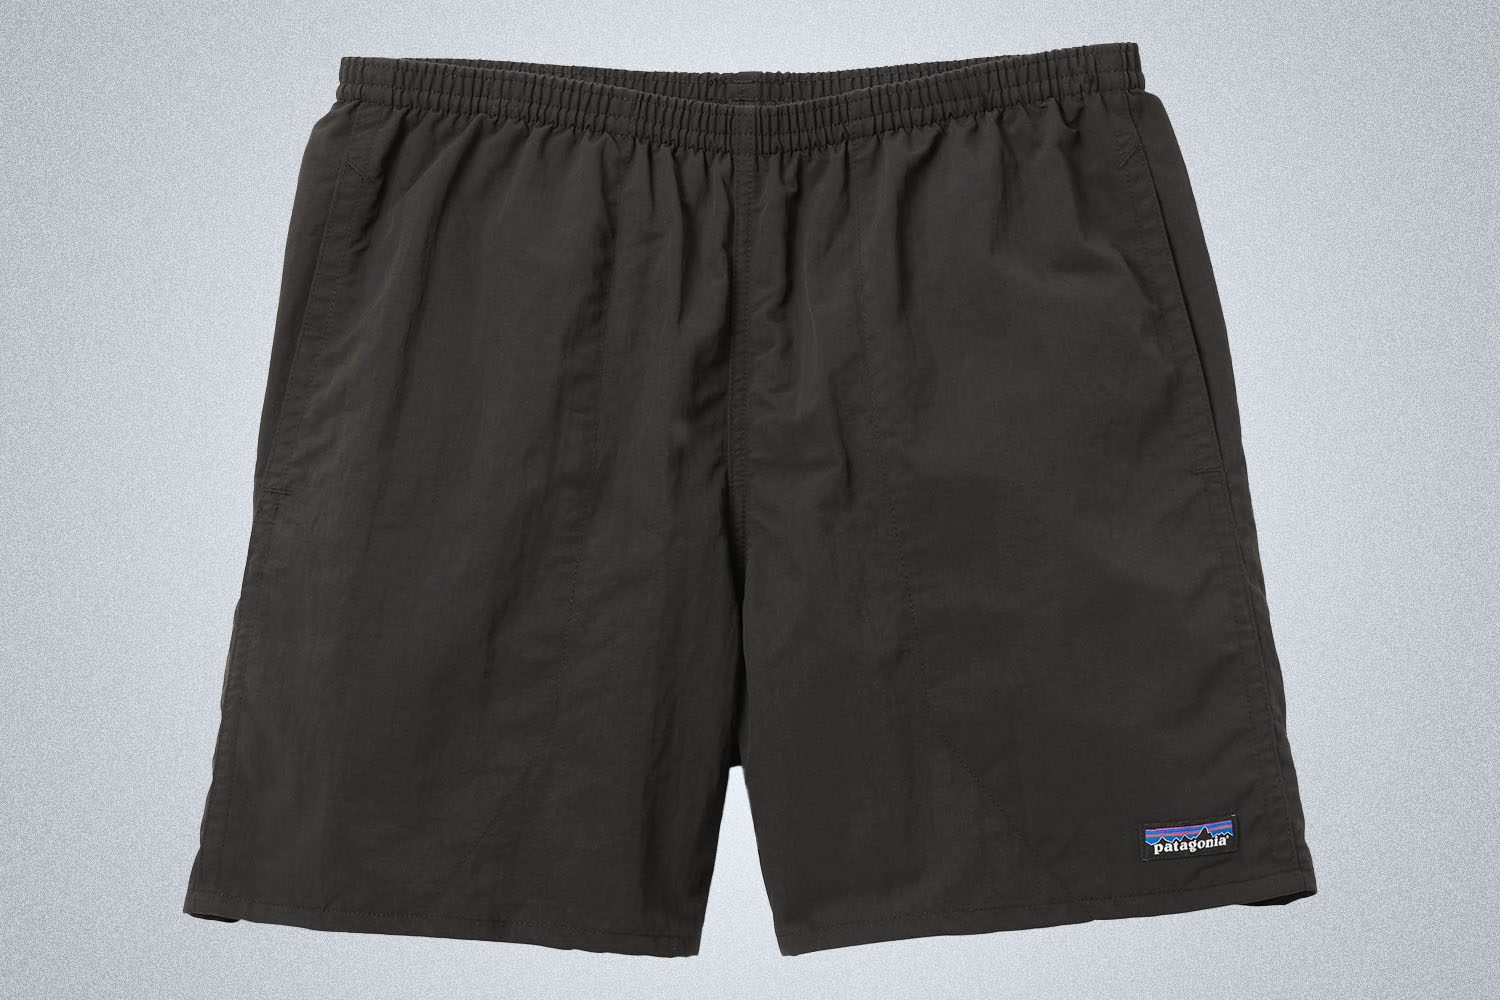 a pair of black Patagonia Baggies on a grey background